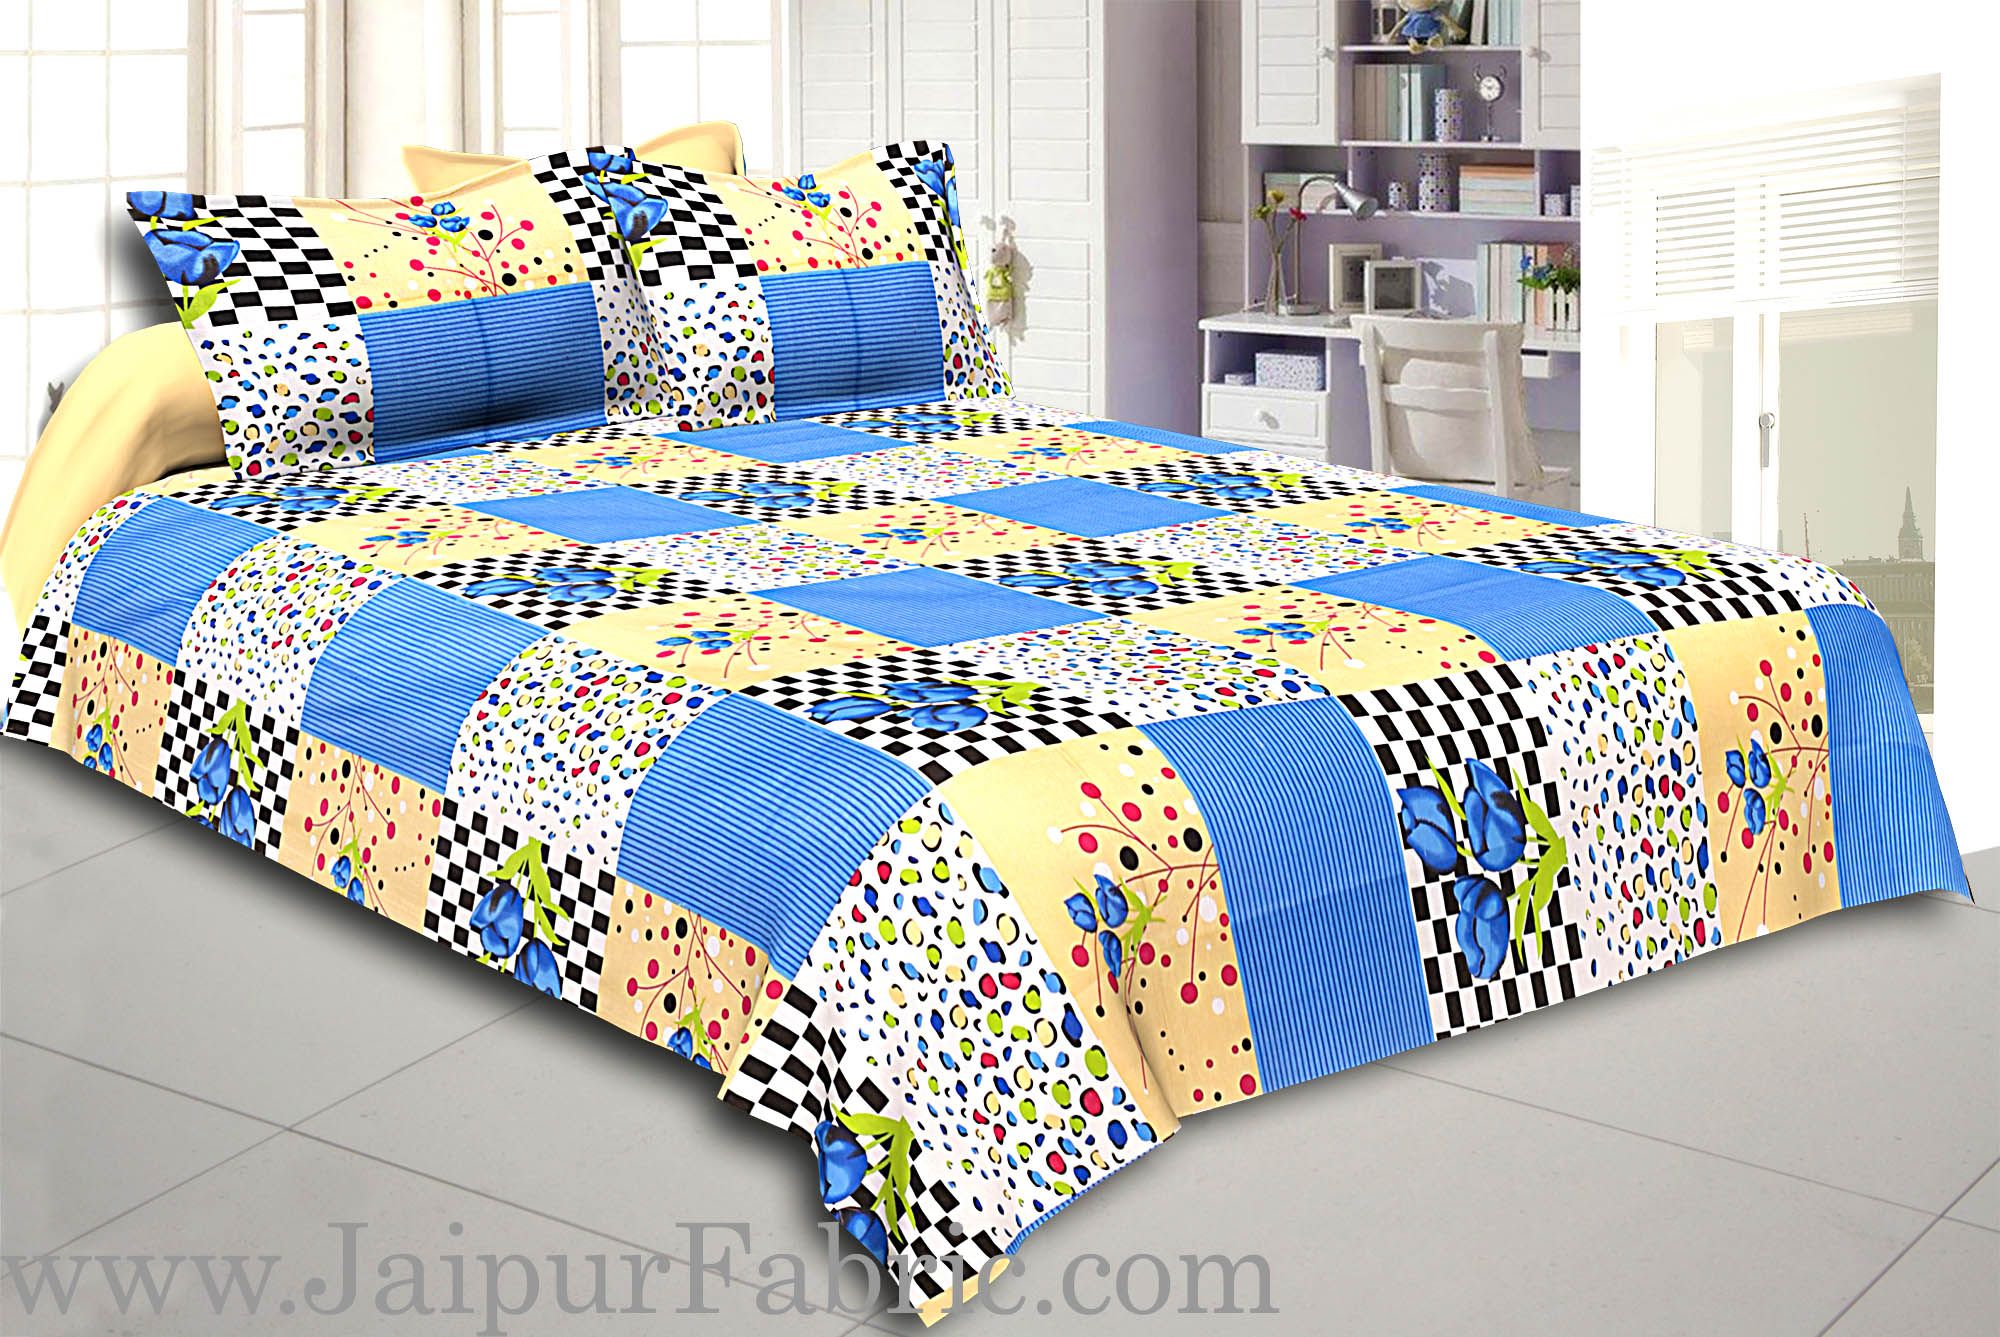 Blue Flower with Checkered Print Double Bed Sheet